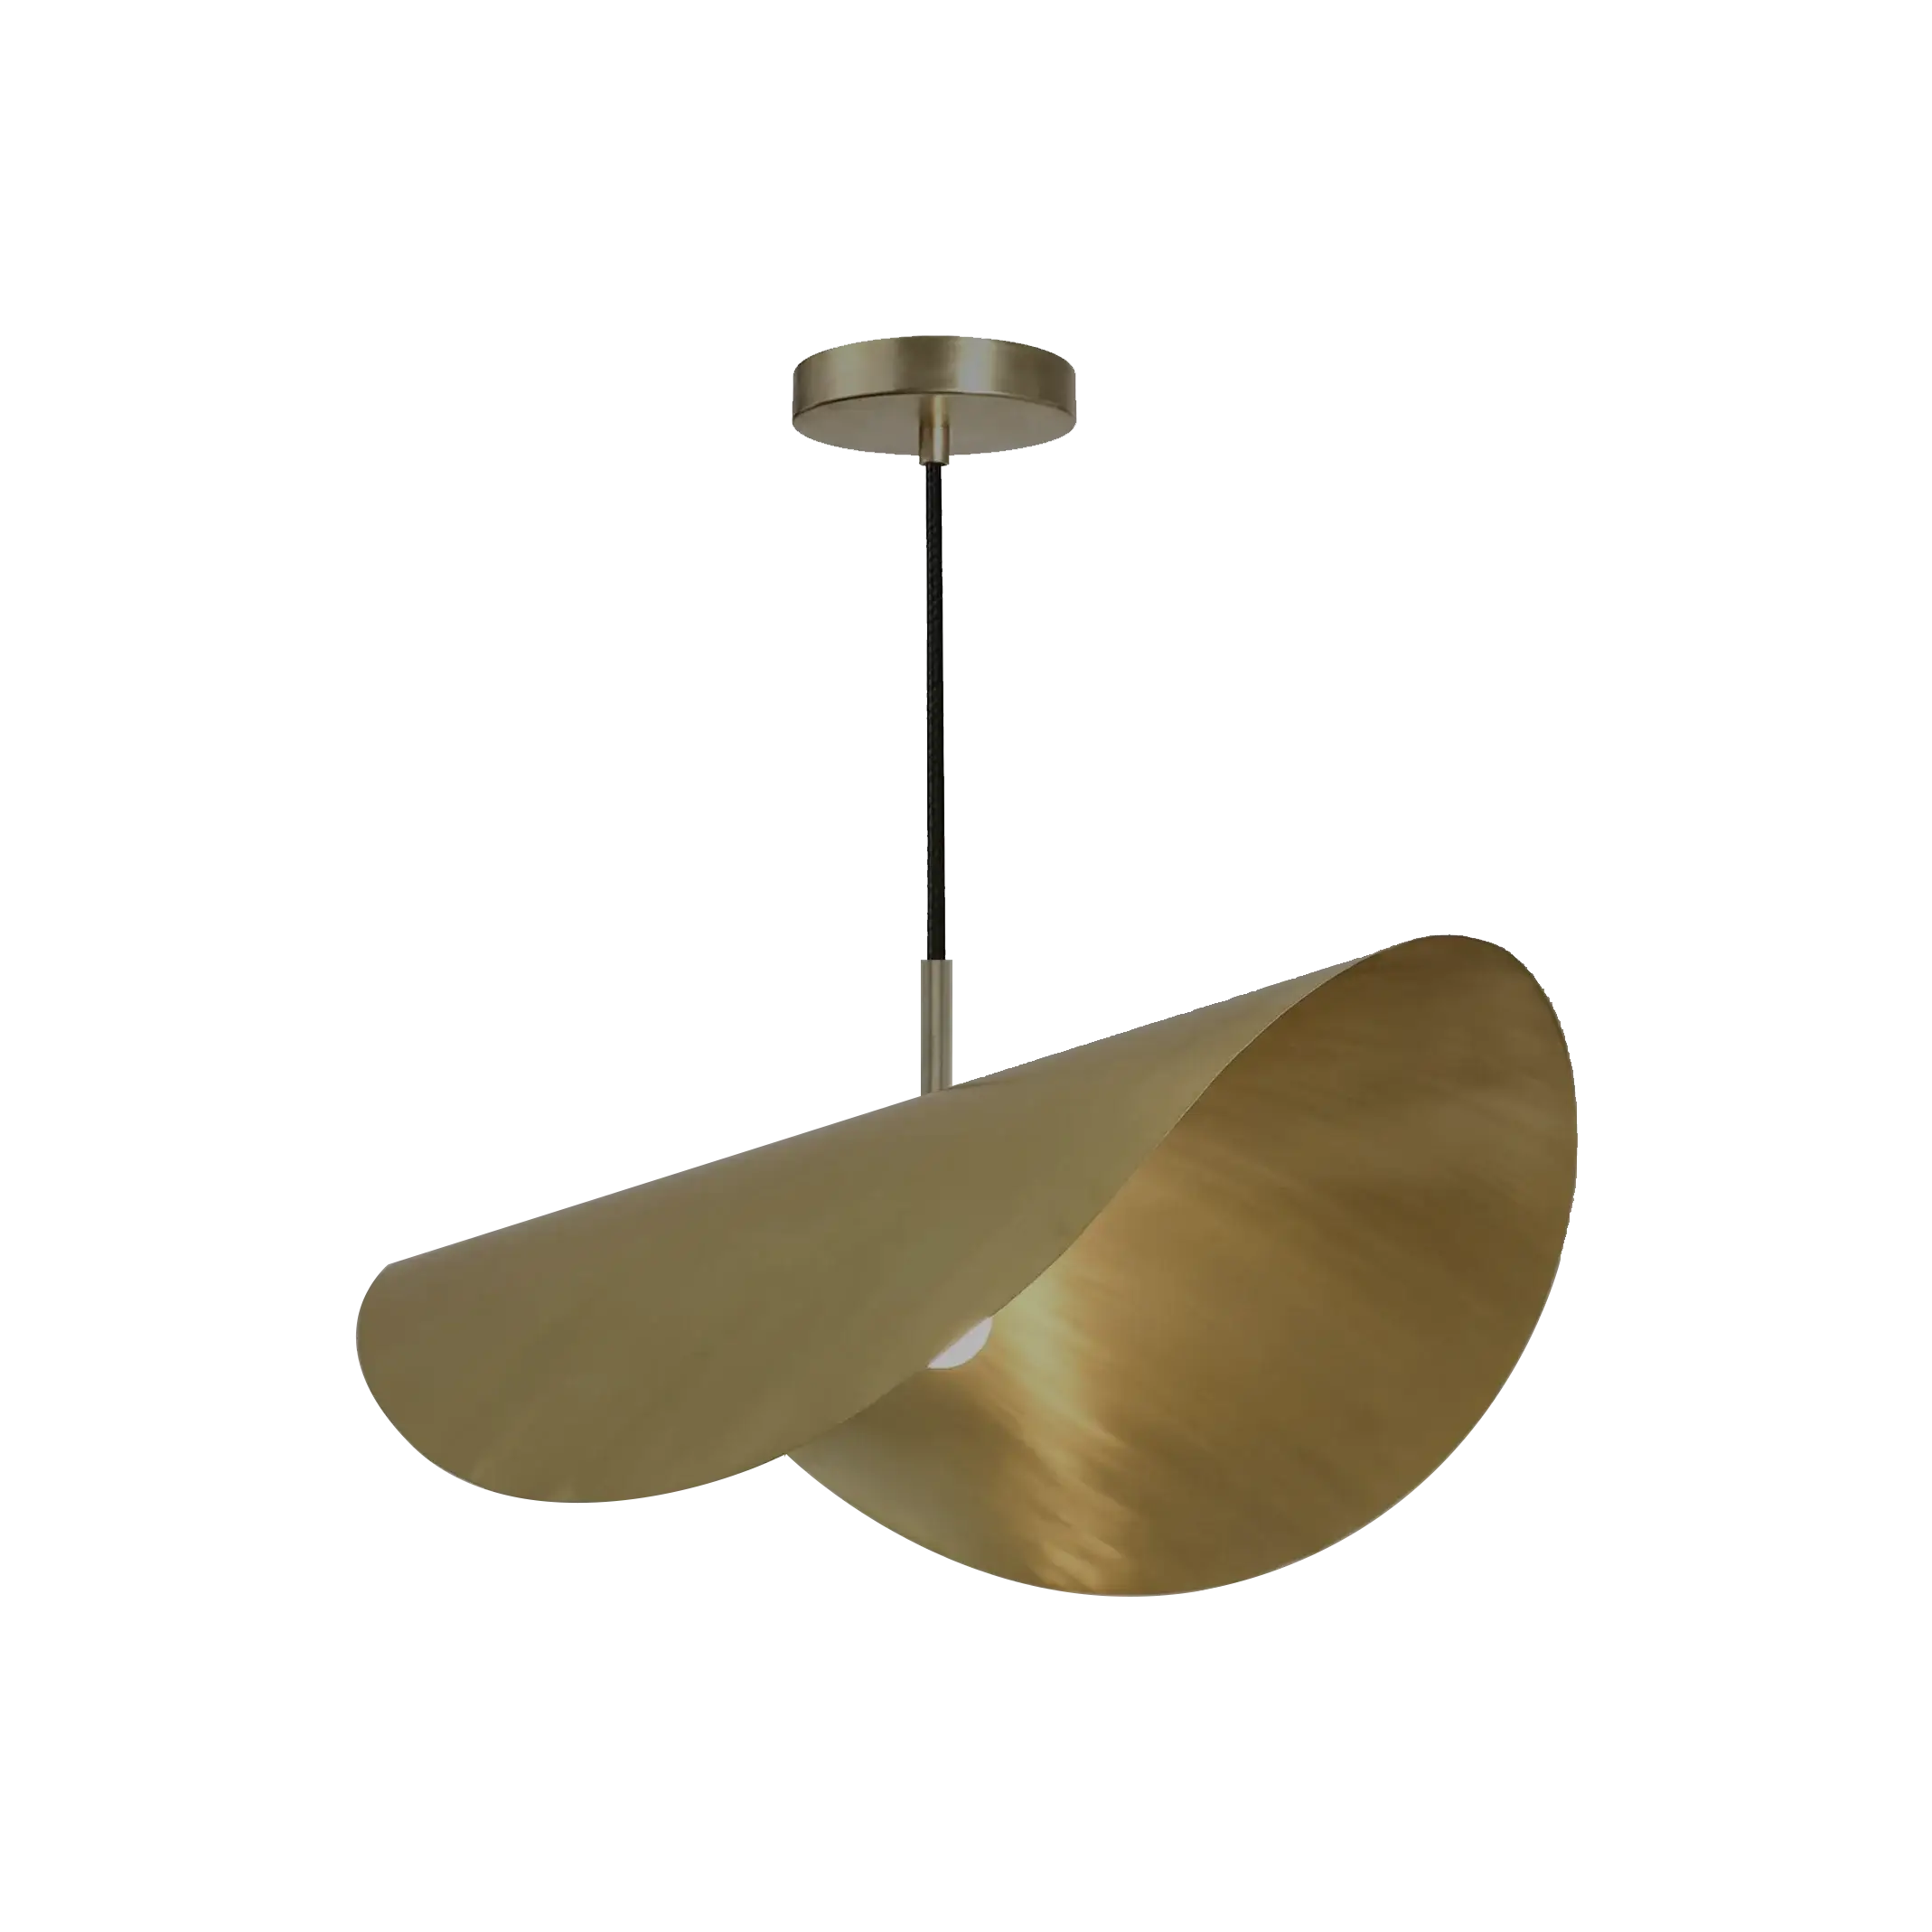 Dounia home Pendant light in antique  brass made of Metal, Model: moja